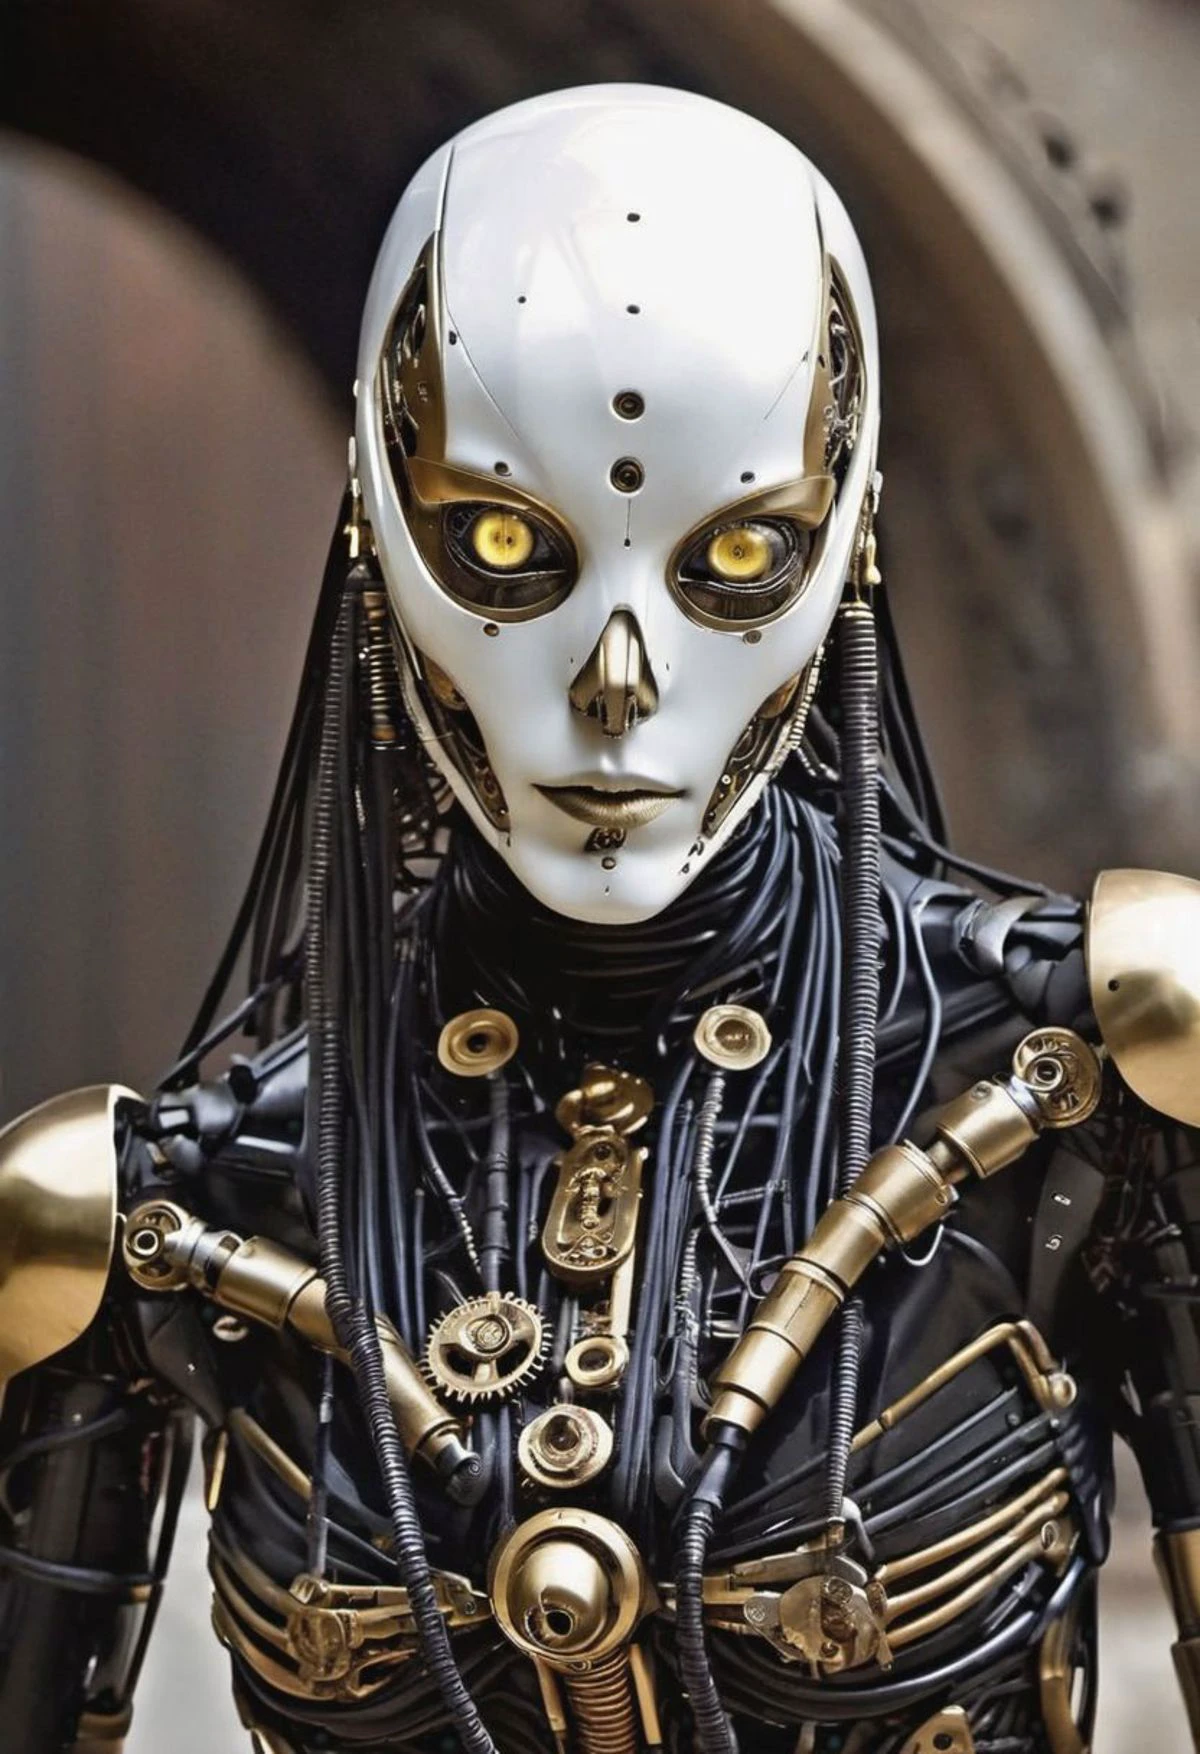 (girl), (skinny), (slender), (alien), (thin), (robot), (android), (cybernetic), (dune), (smooth), (cyborg), (mechanical), (tubes), (gears), (claws), (tentacles), (giger), (nun), (cross), (devine), (veil), (gold teeth), (rings), (golden teeth), (white eyes),(Utopia) A 